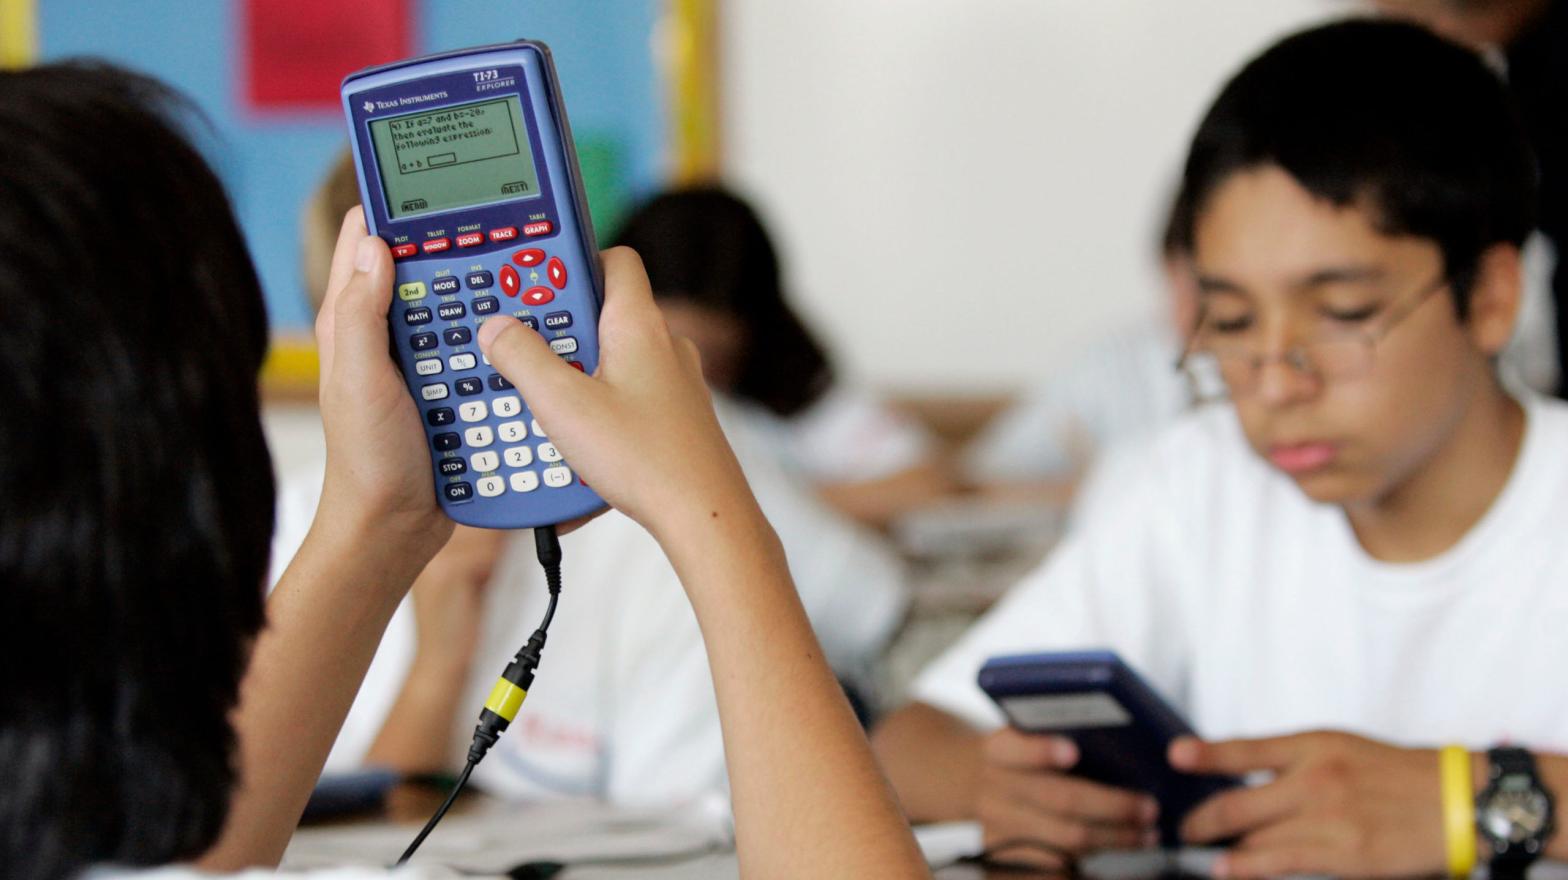 Look, I know that’s a TI-73, but options for wire photos of graphing calculators are limited, ok? (Photo: AP Images)